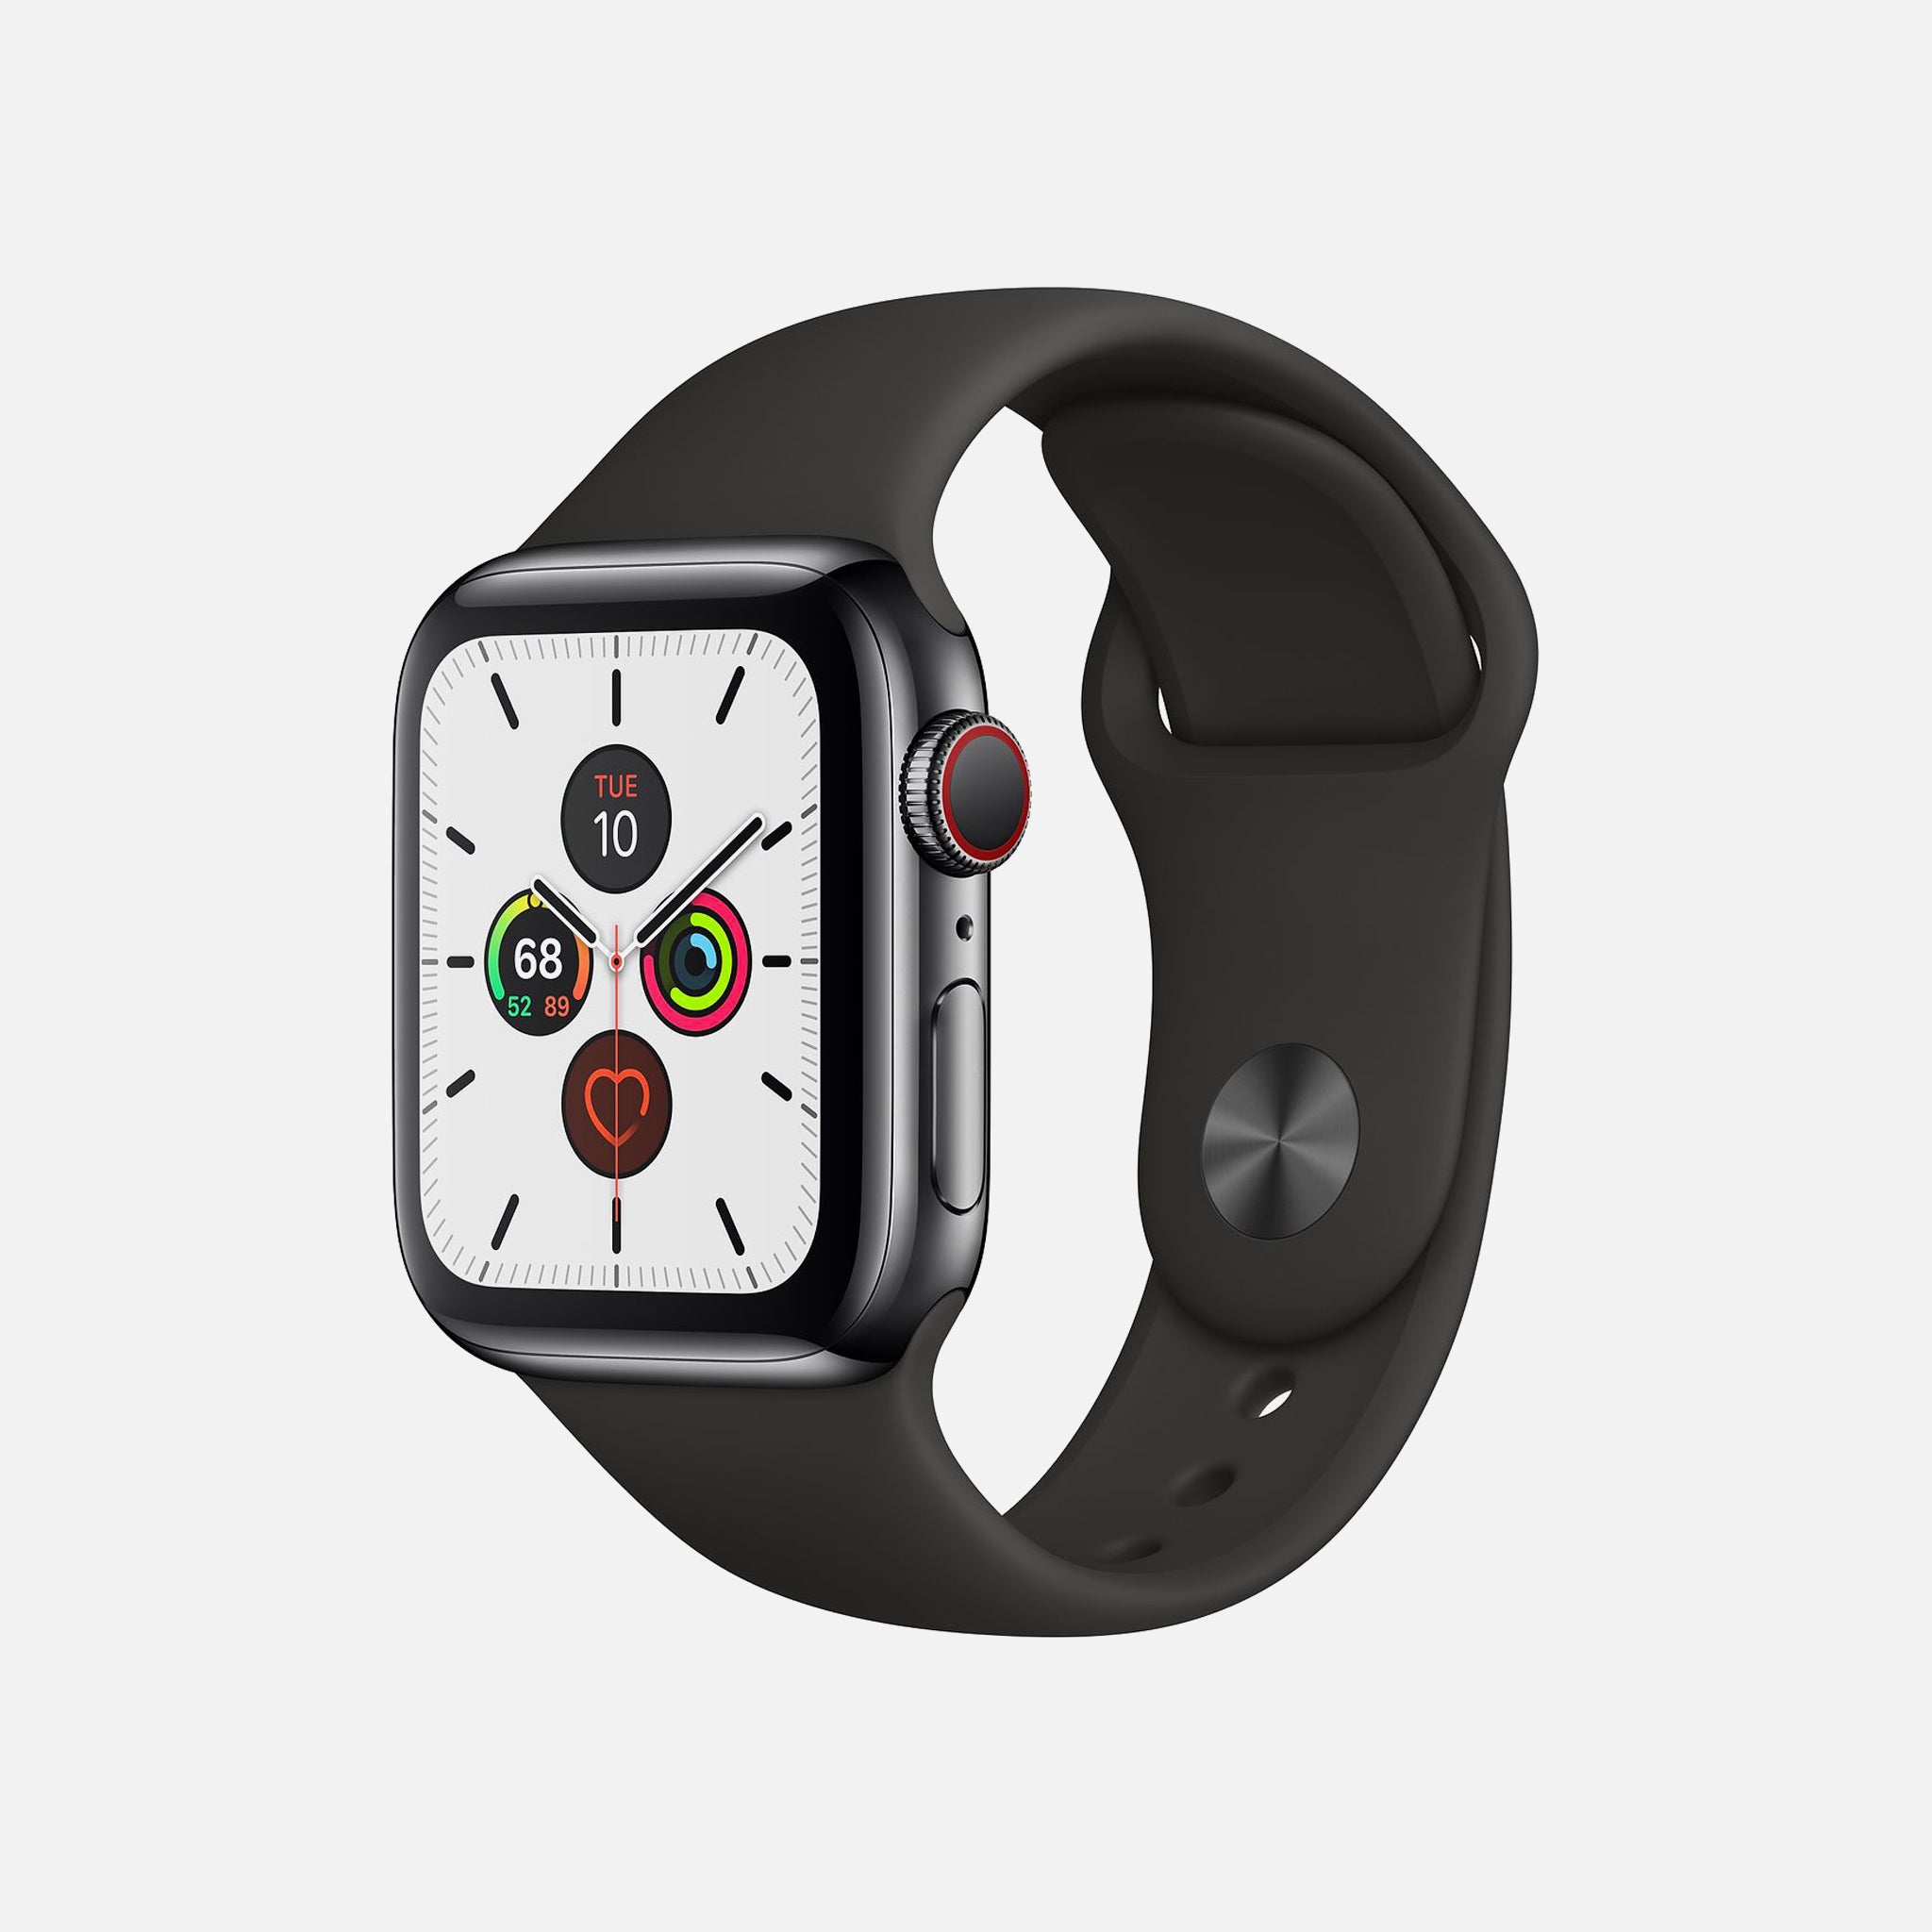 apple 4 watch without cellular